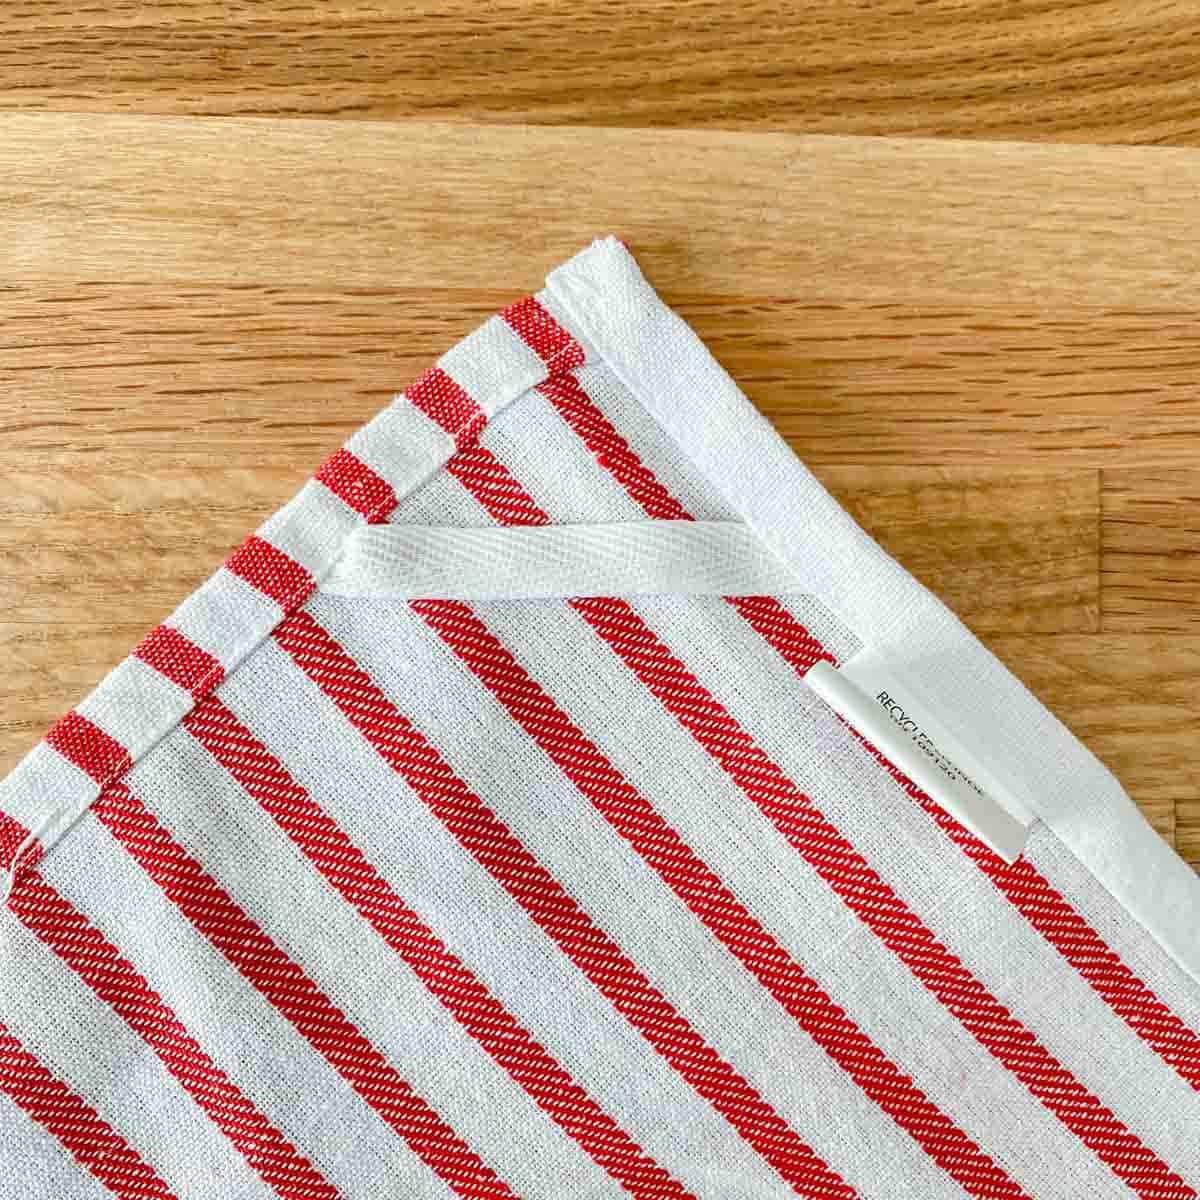 backside of a red and white striped dishtowel showing the hanging loop